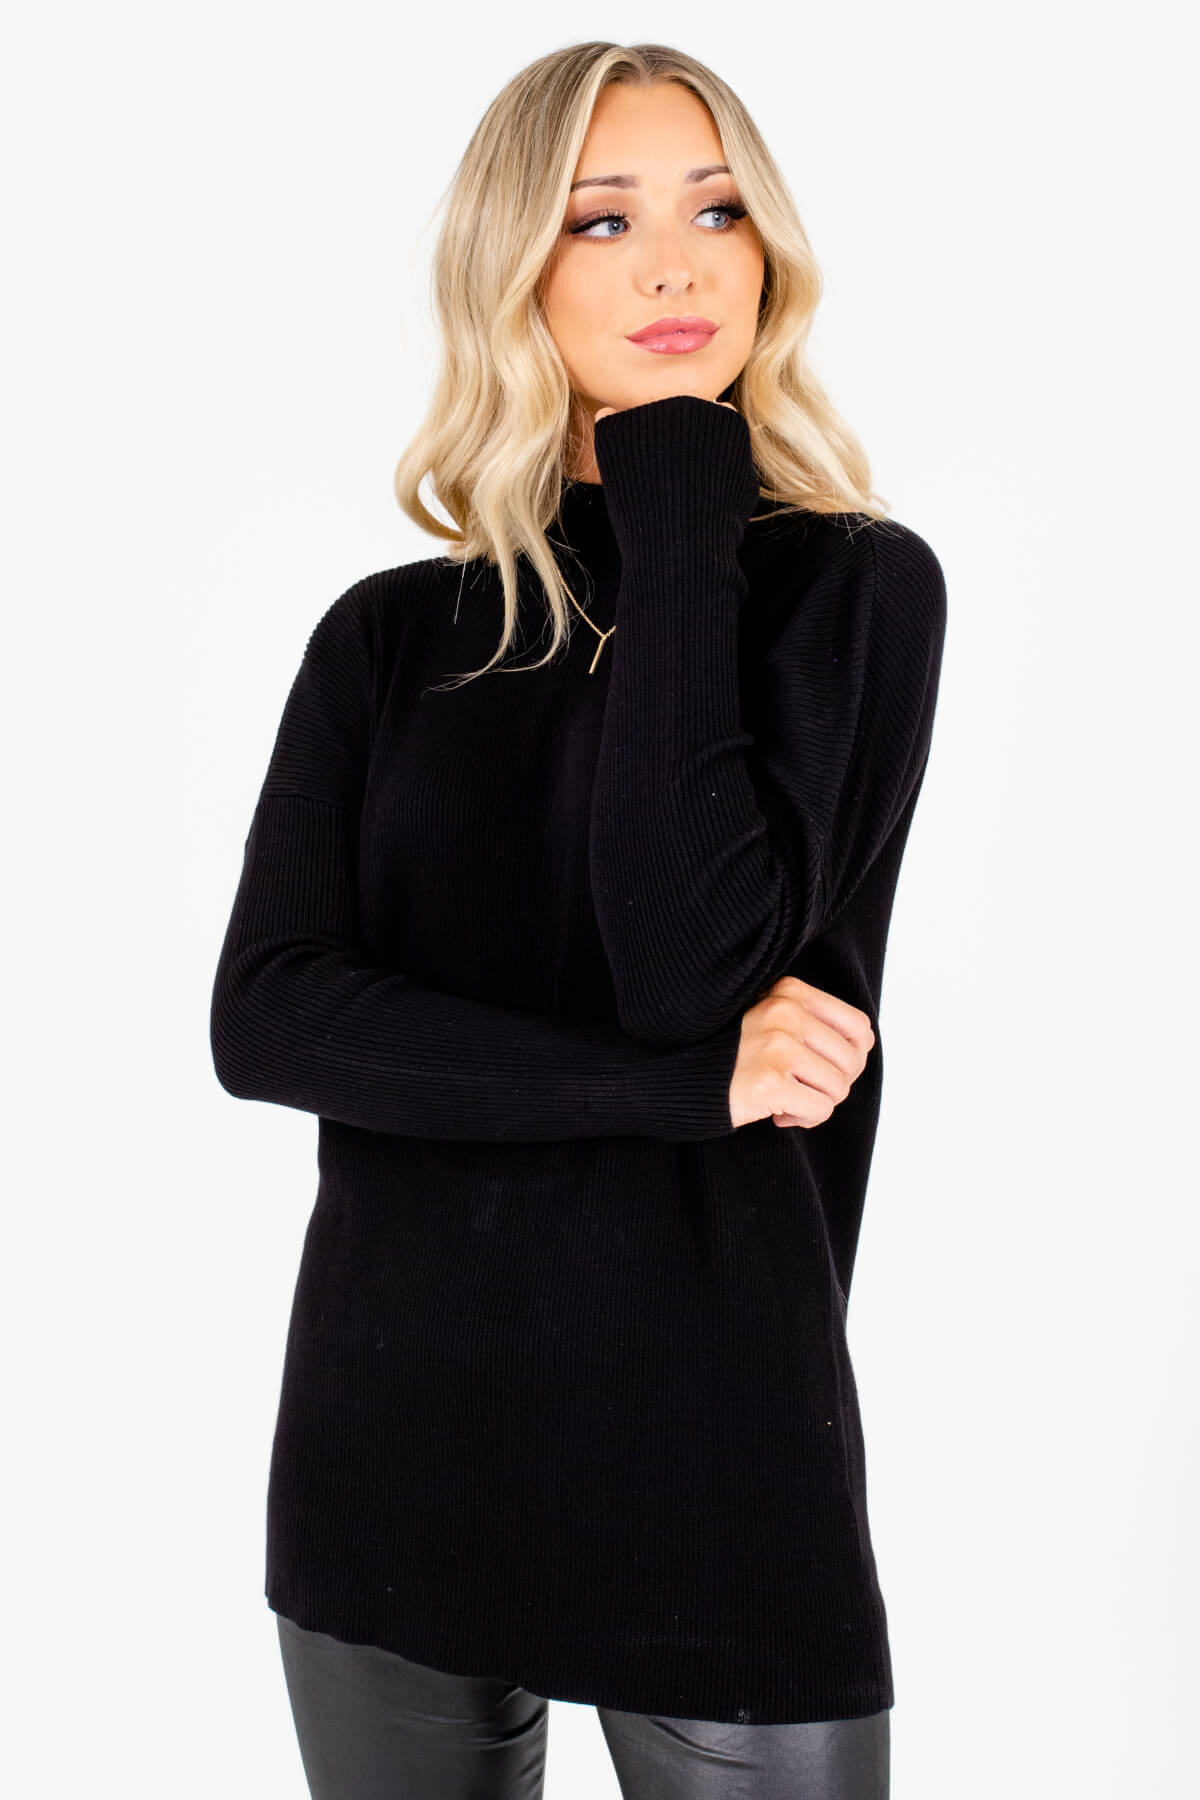 Women’s Black Warm and Cozy Boutique Clothing